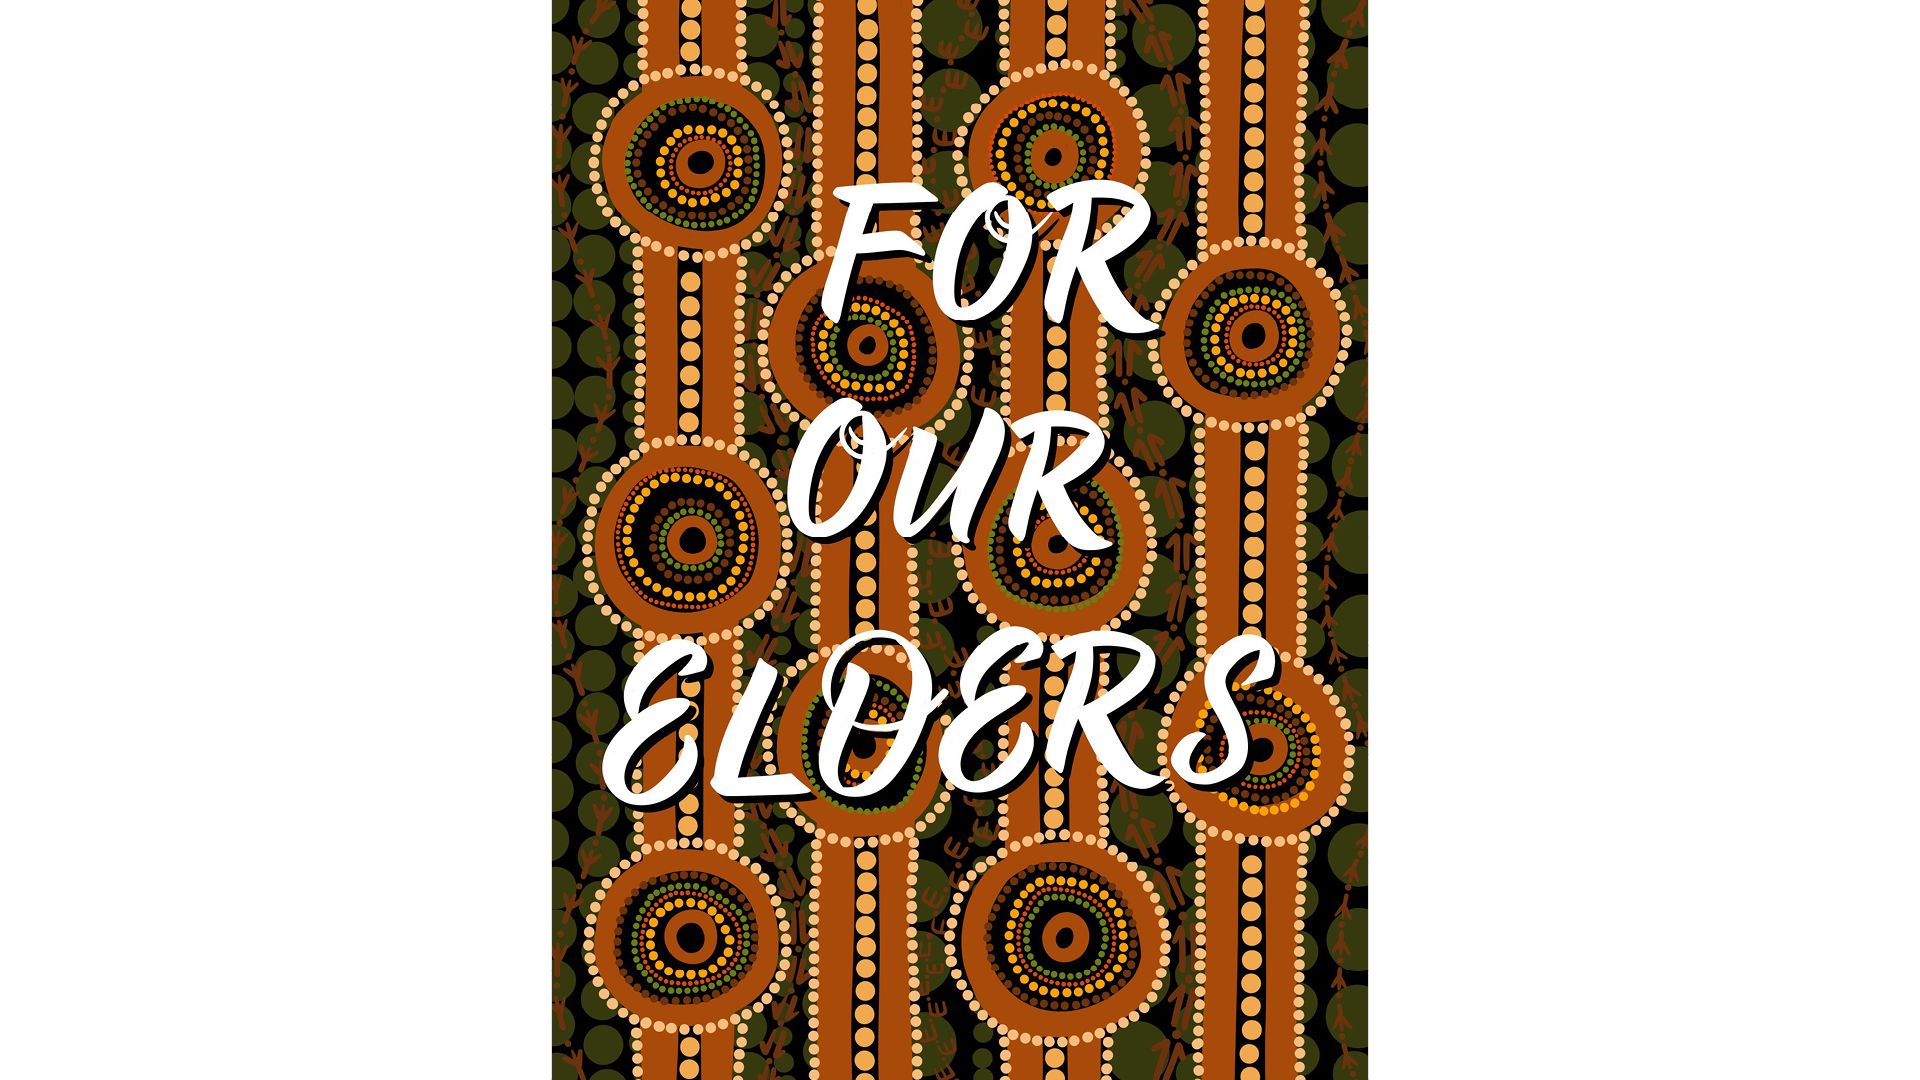 Digital artwork featuring brown patterns on a dark green background, with white letters spelling 'For our elders' in the foreground